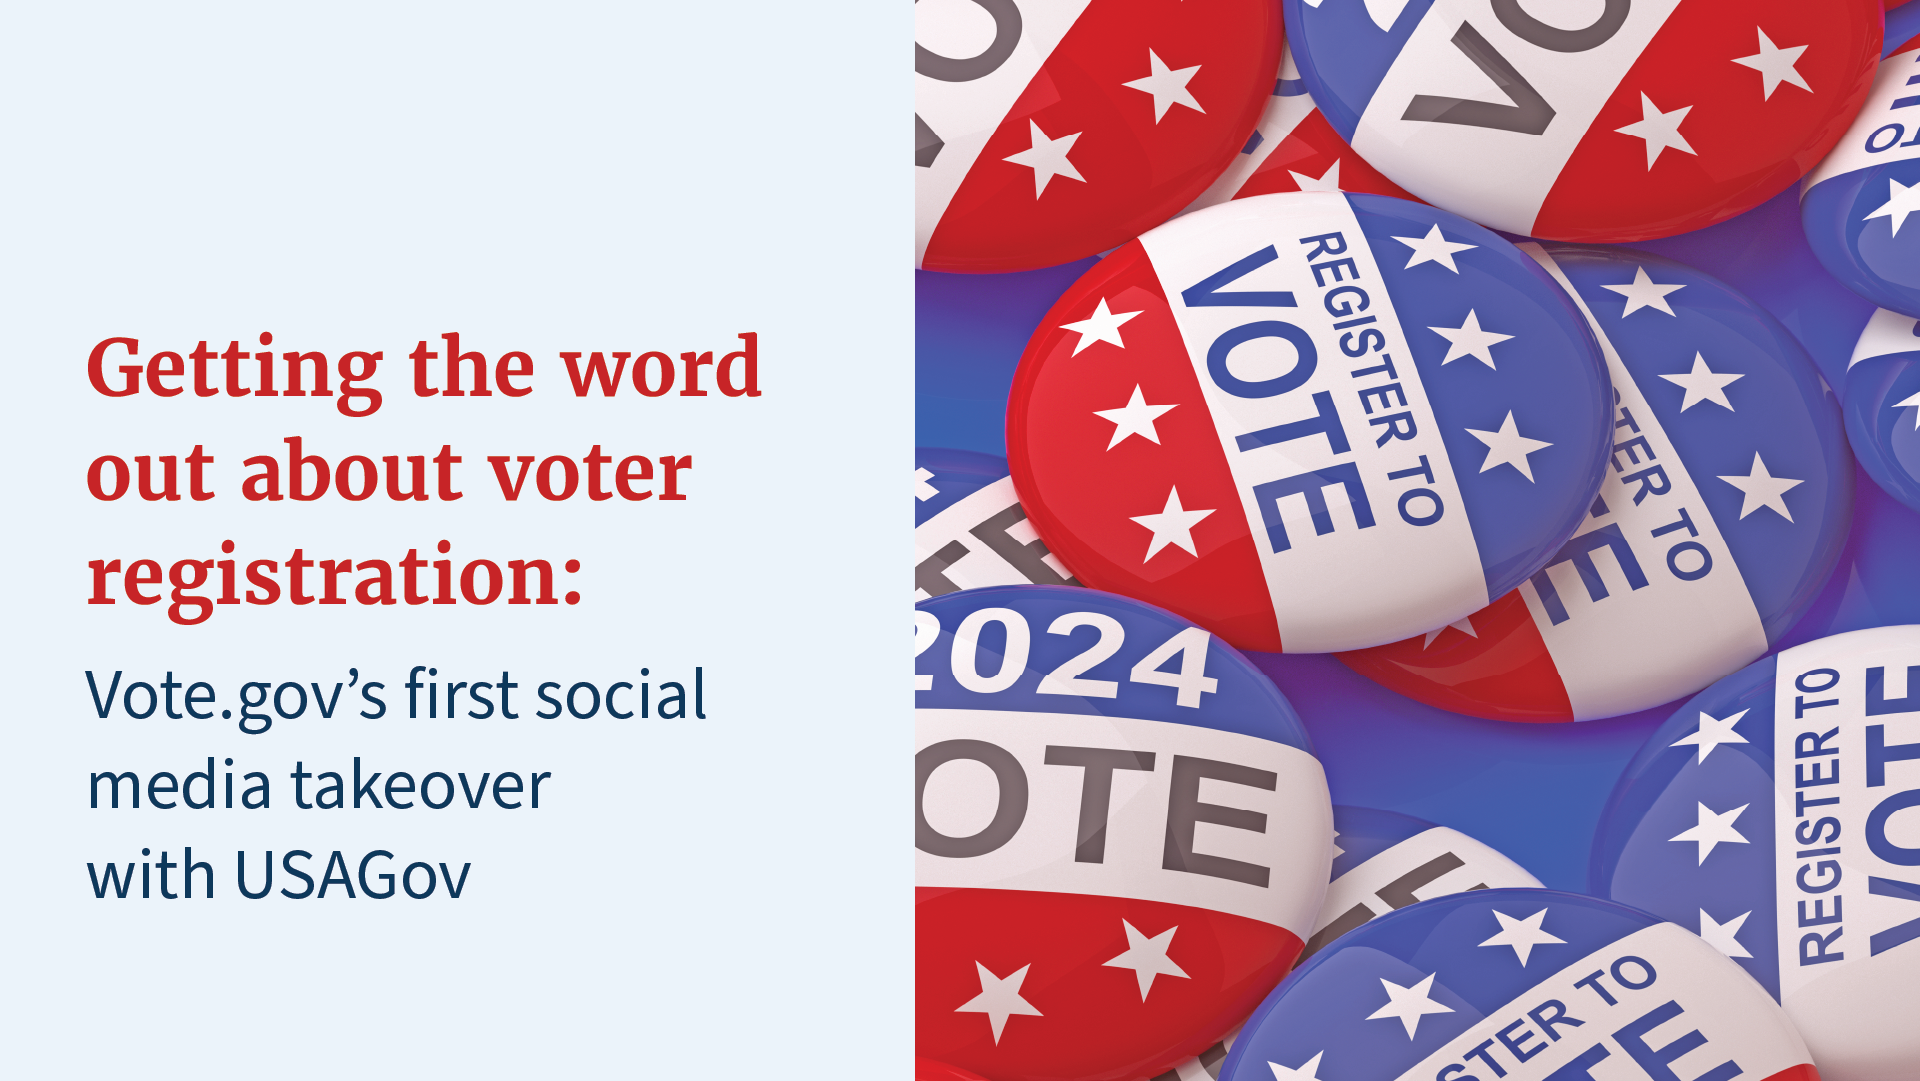 Getting the word out about voter registration: Vote.gov’s first social media takeover with USAGov